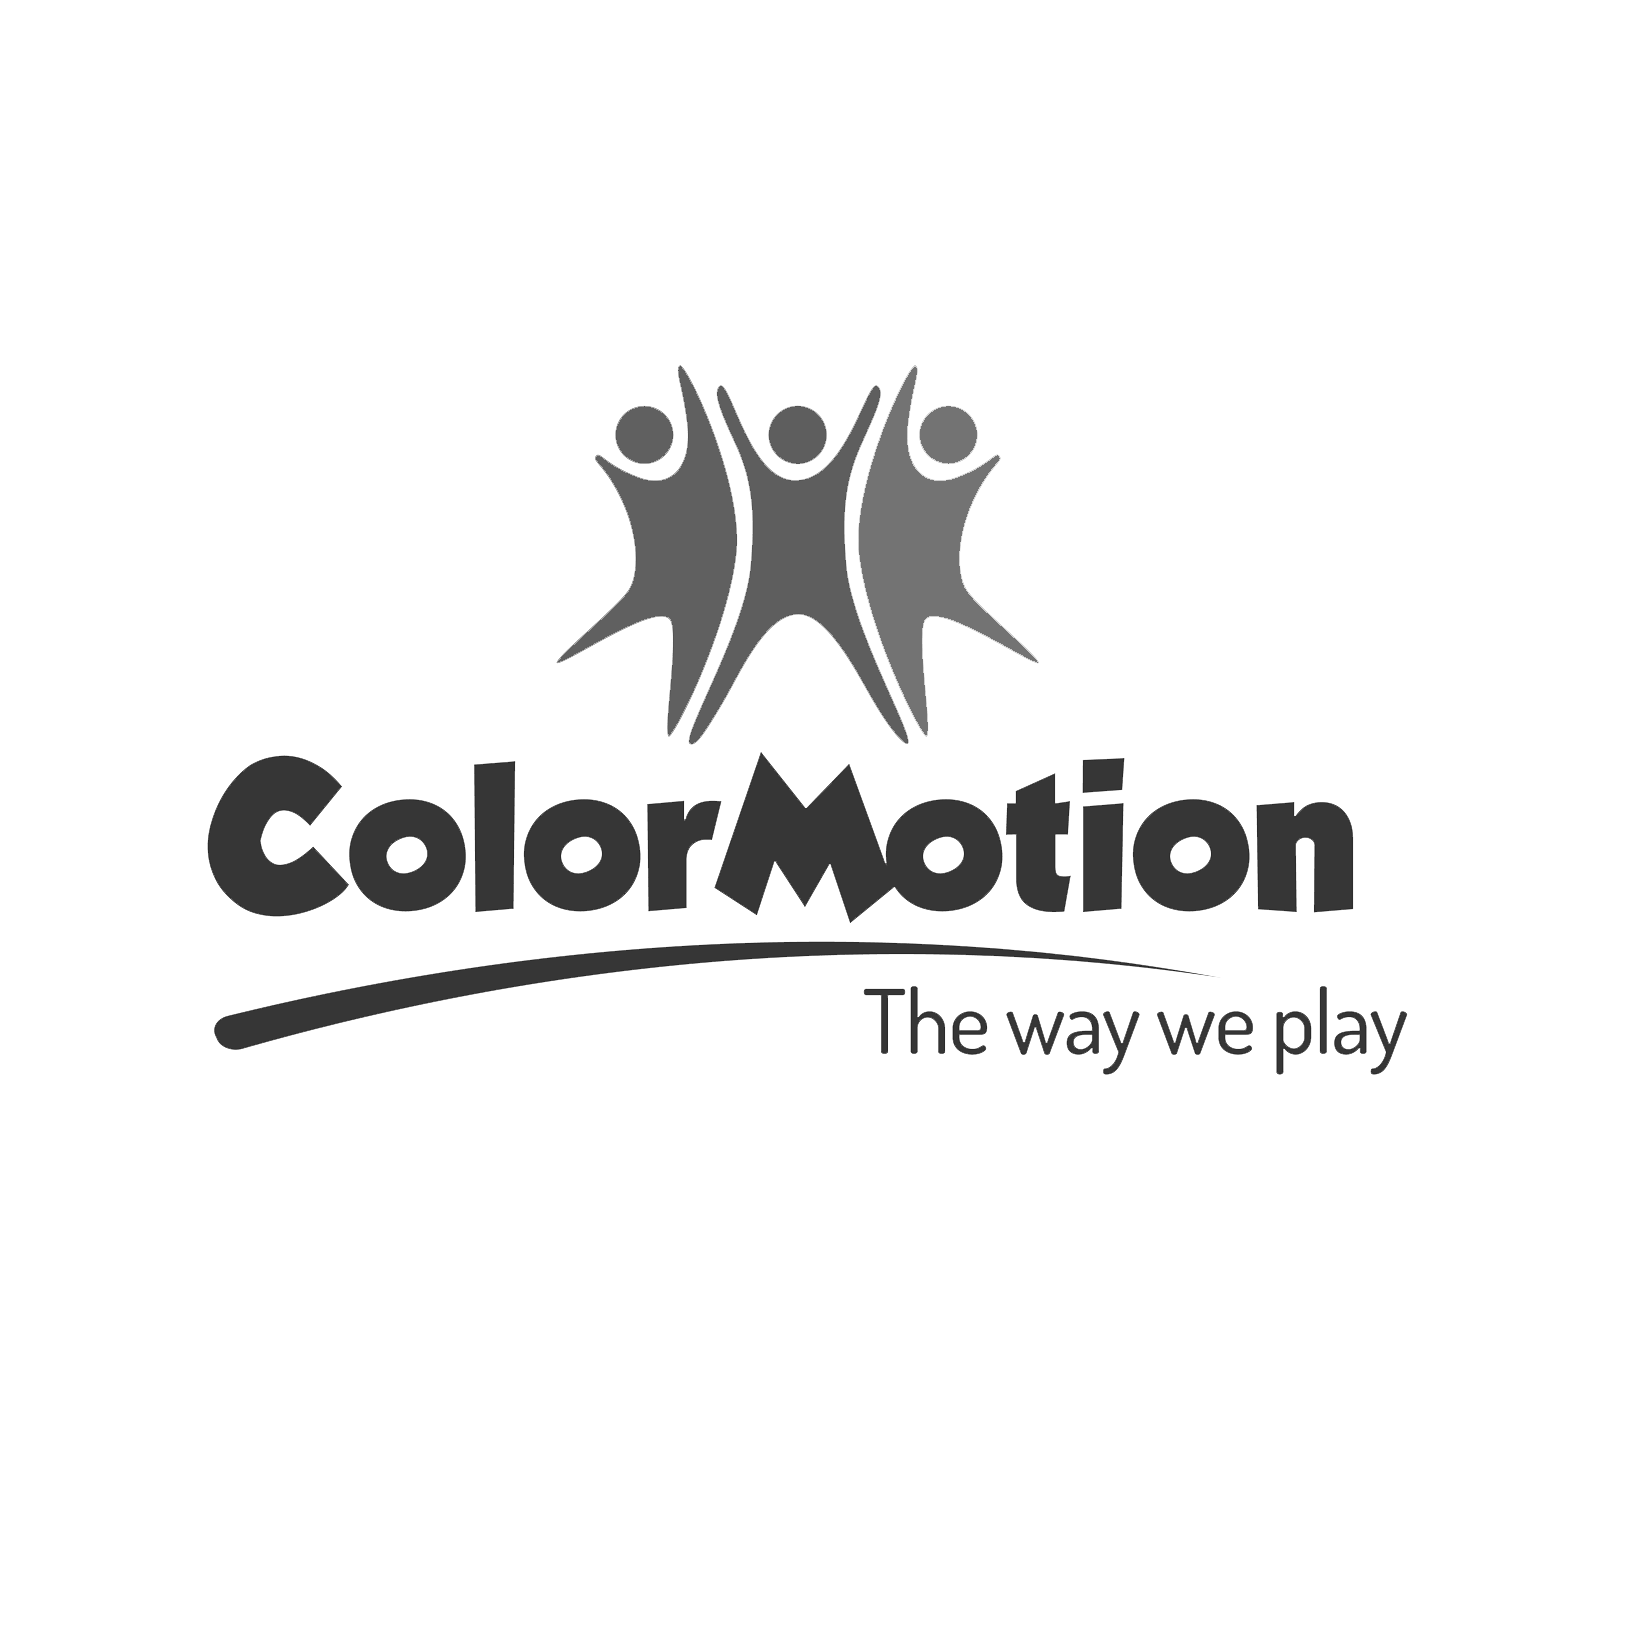 ColorMotionSA - Black and White - Transparent